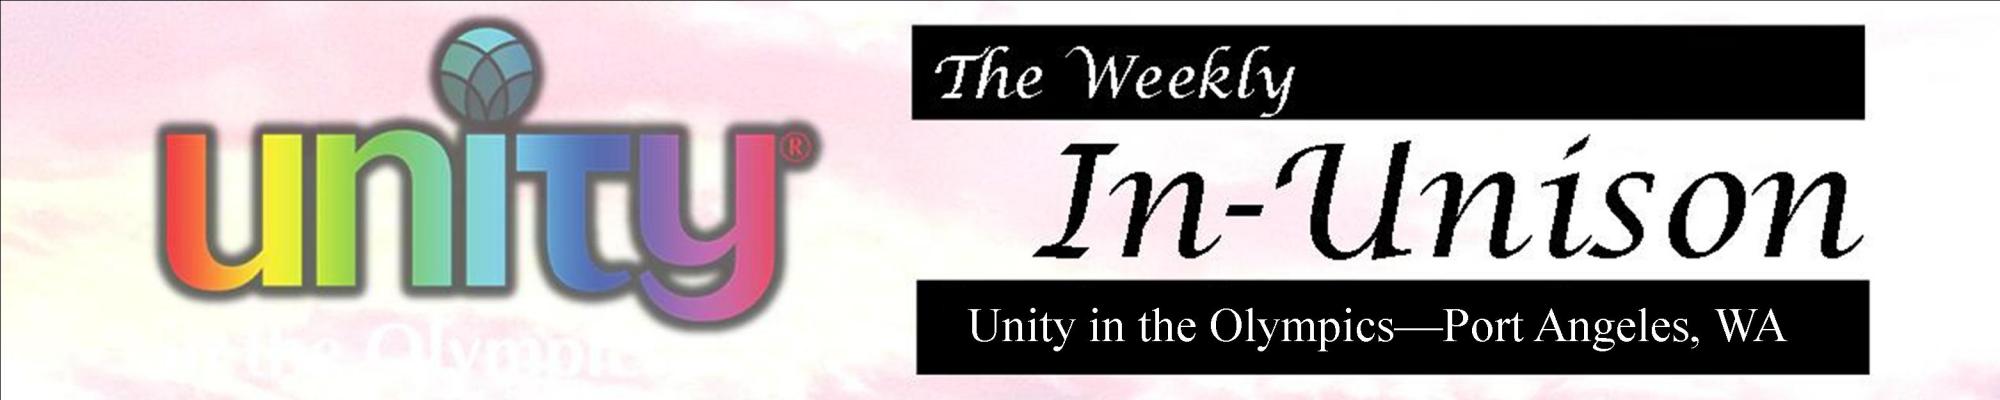 The Weekly IN-UNISON December 27th Edition